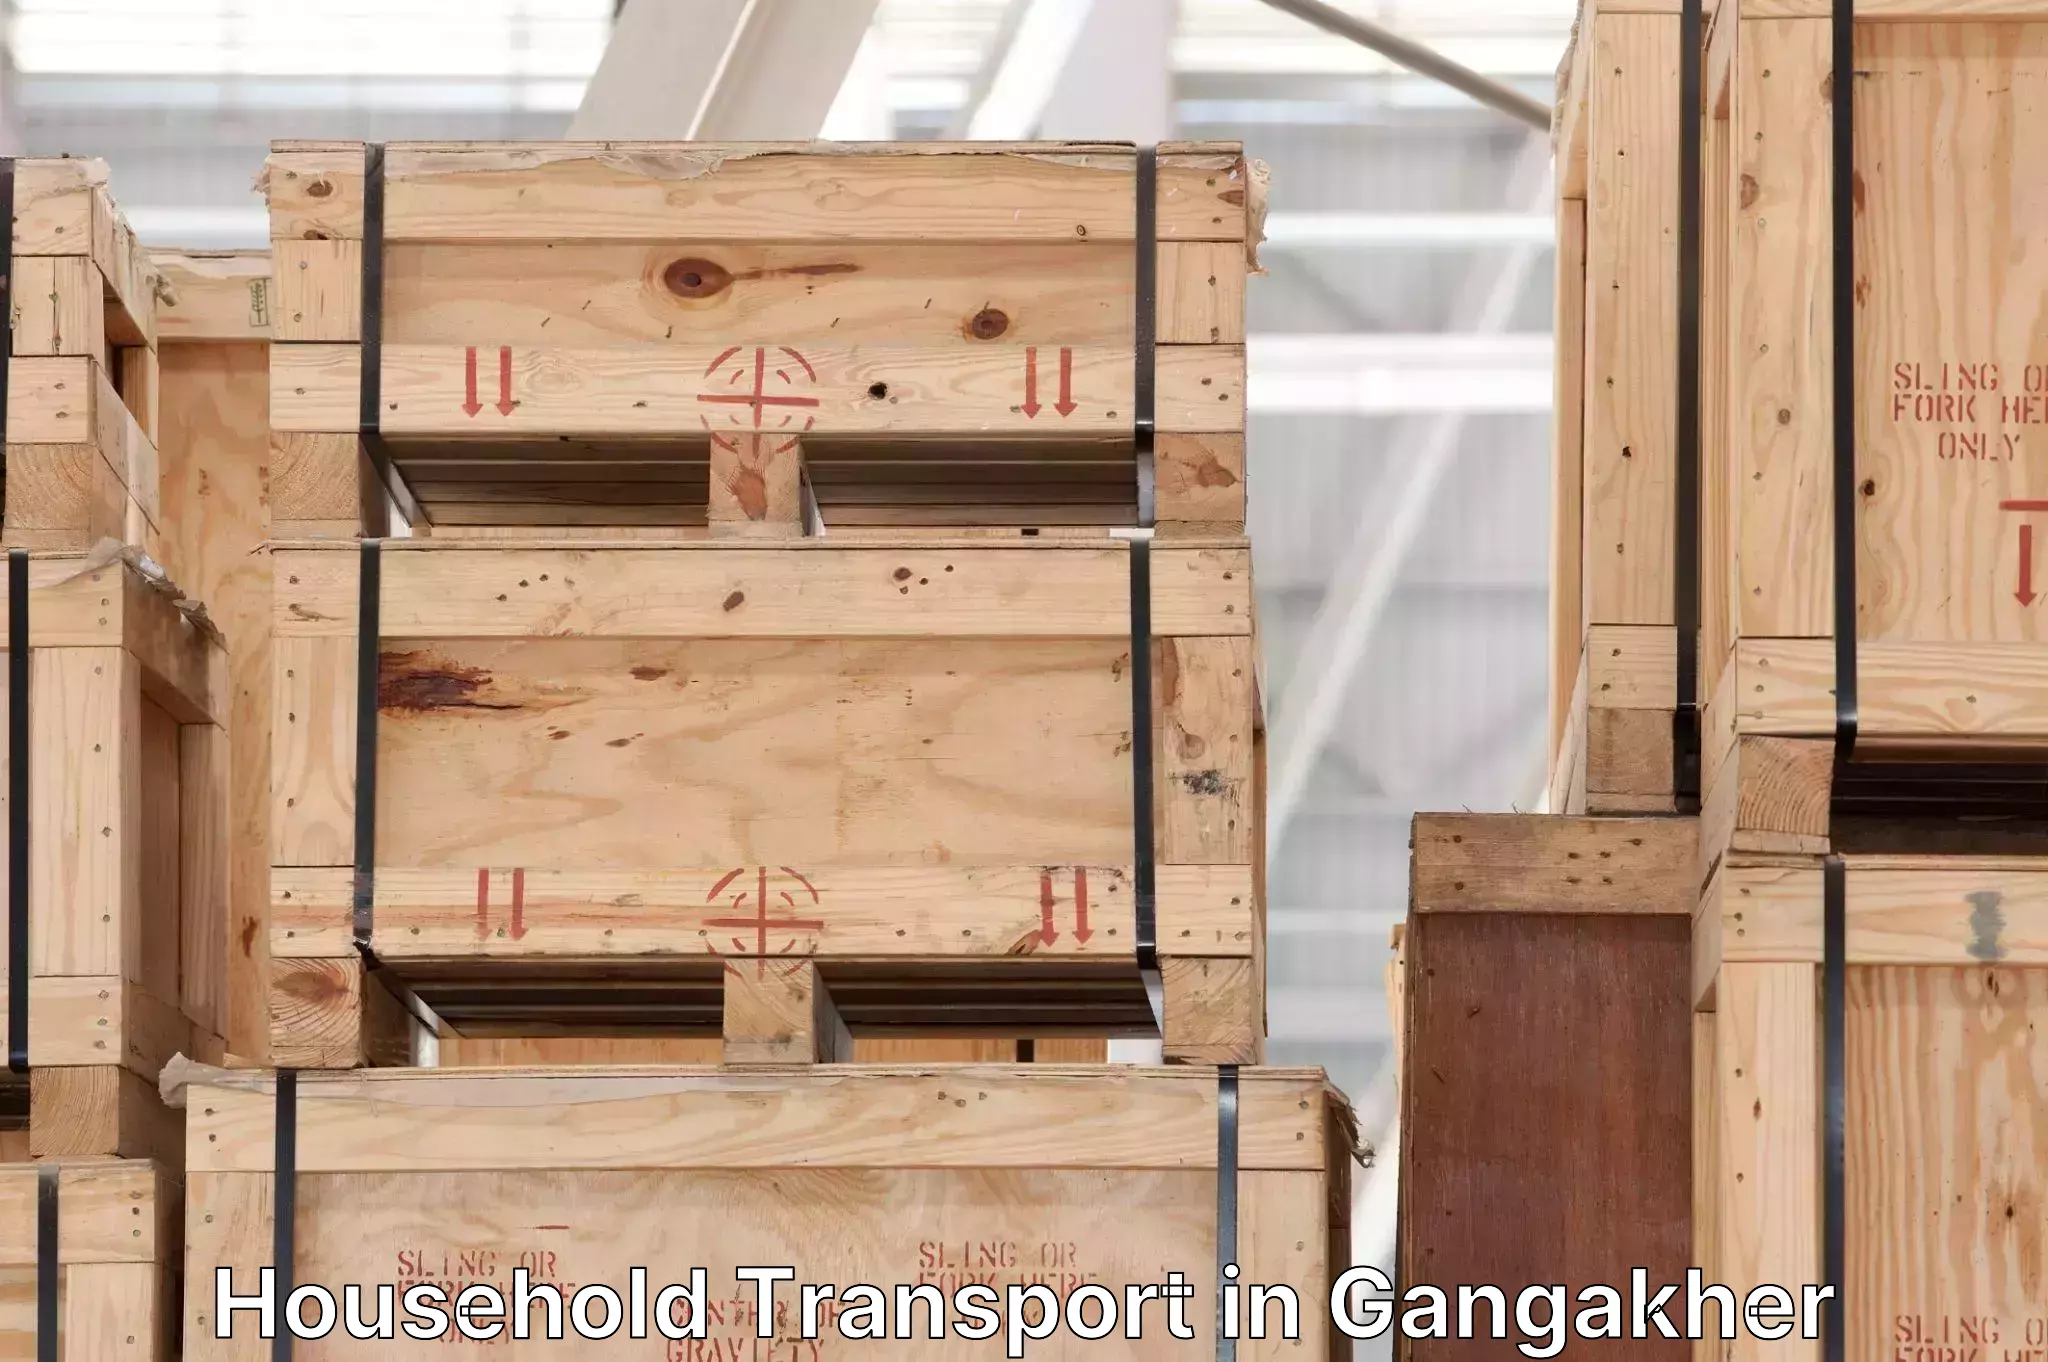 Household logistics services in Gangakher